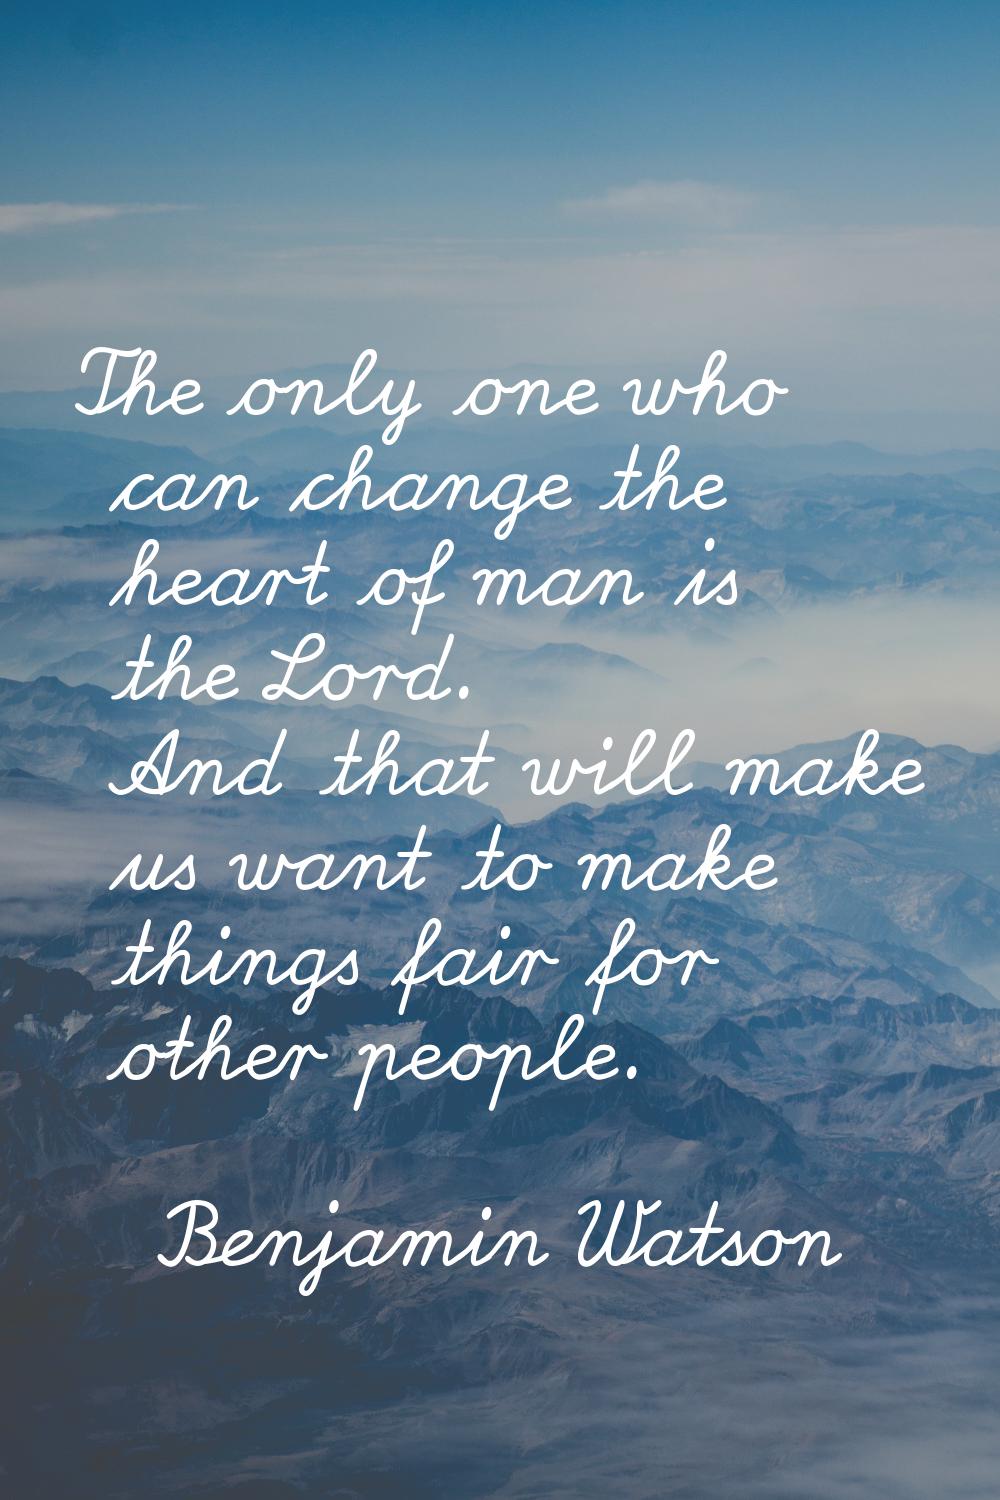 The only one who can change the heart of man is the Lord. And that will make us want to make things